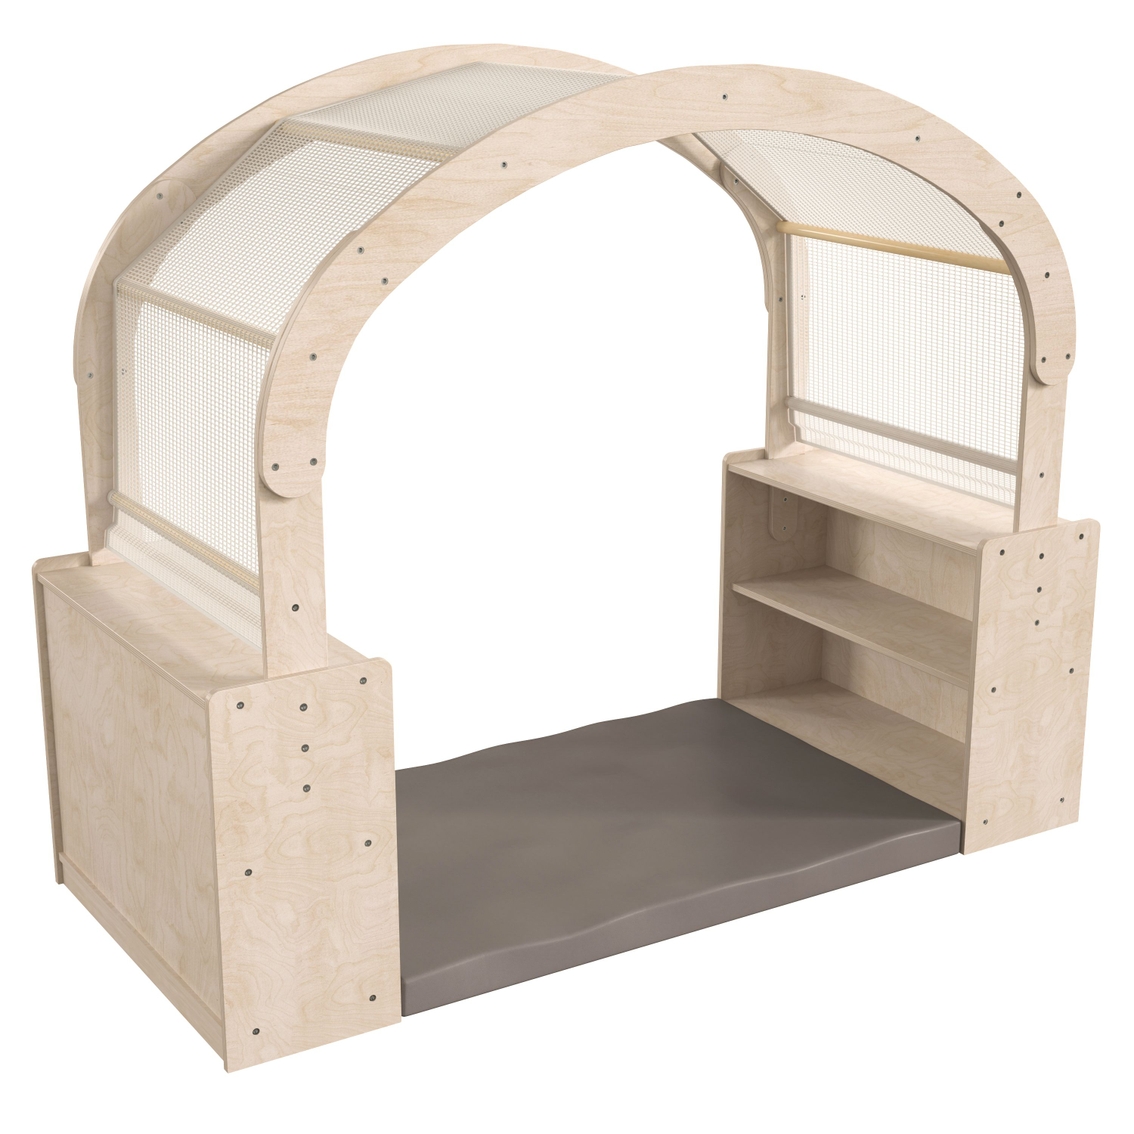 Flash Furniture Wooden Reading Nook with Storage Shelves & Canopy - Image 4 of 5